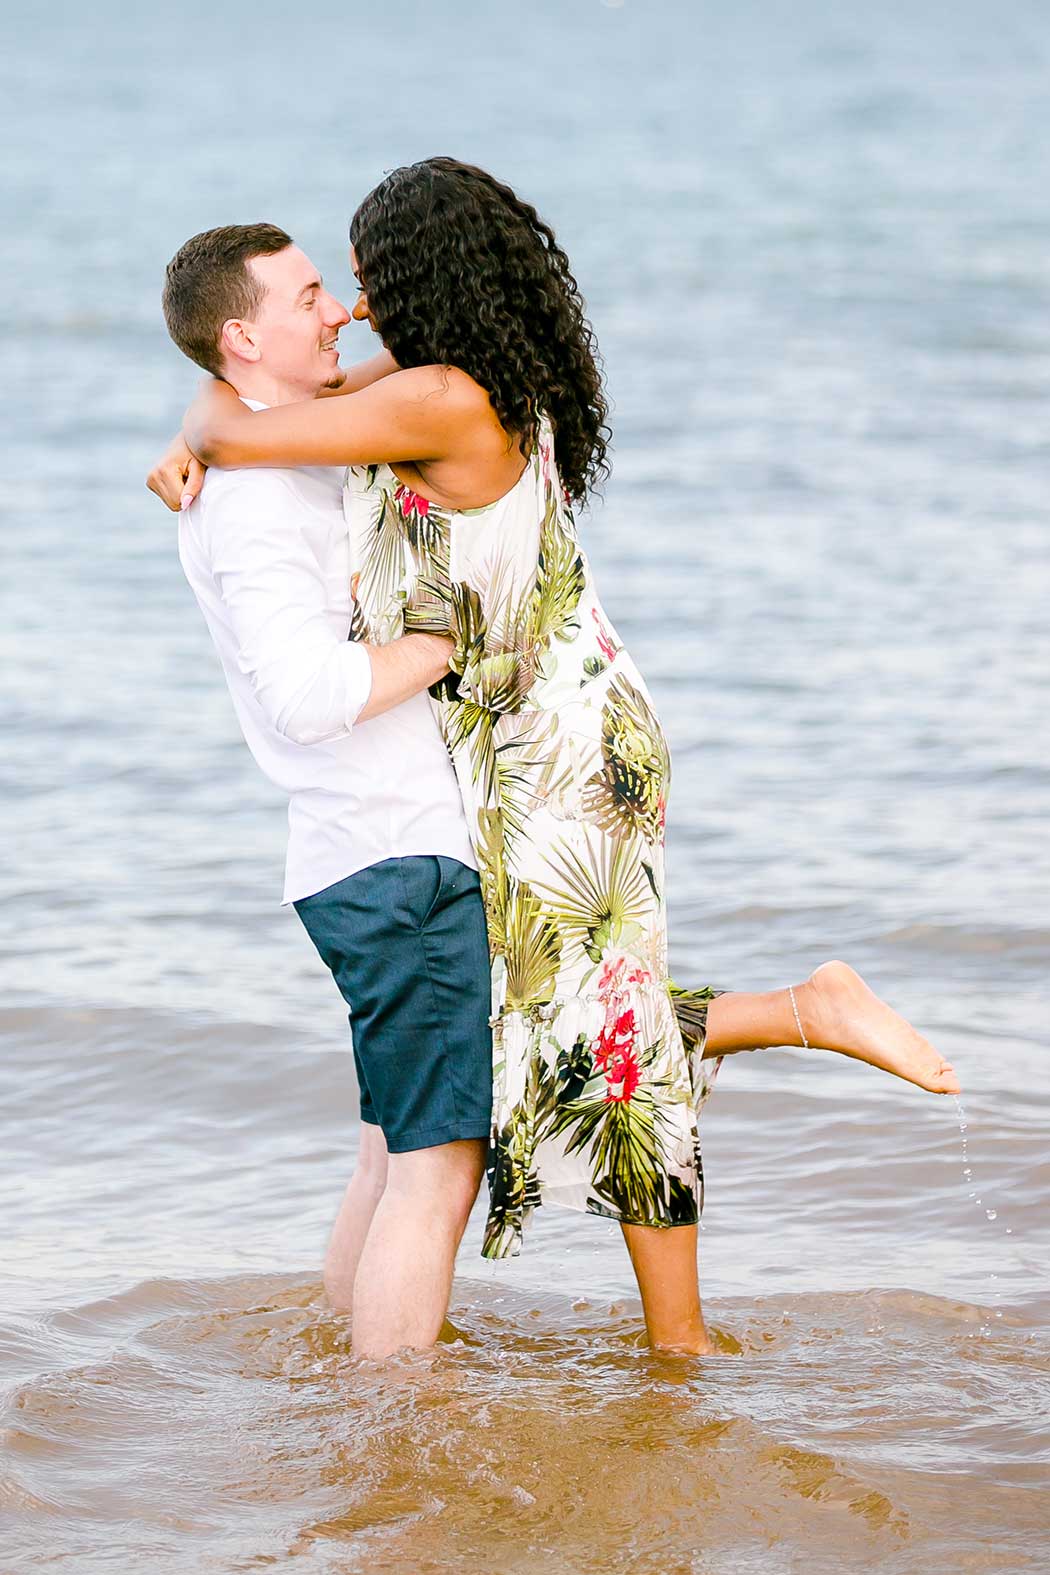 mixed race couple hug in water during engagement photography | pompano beach natural engagement photographer